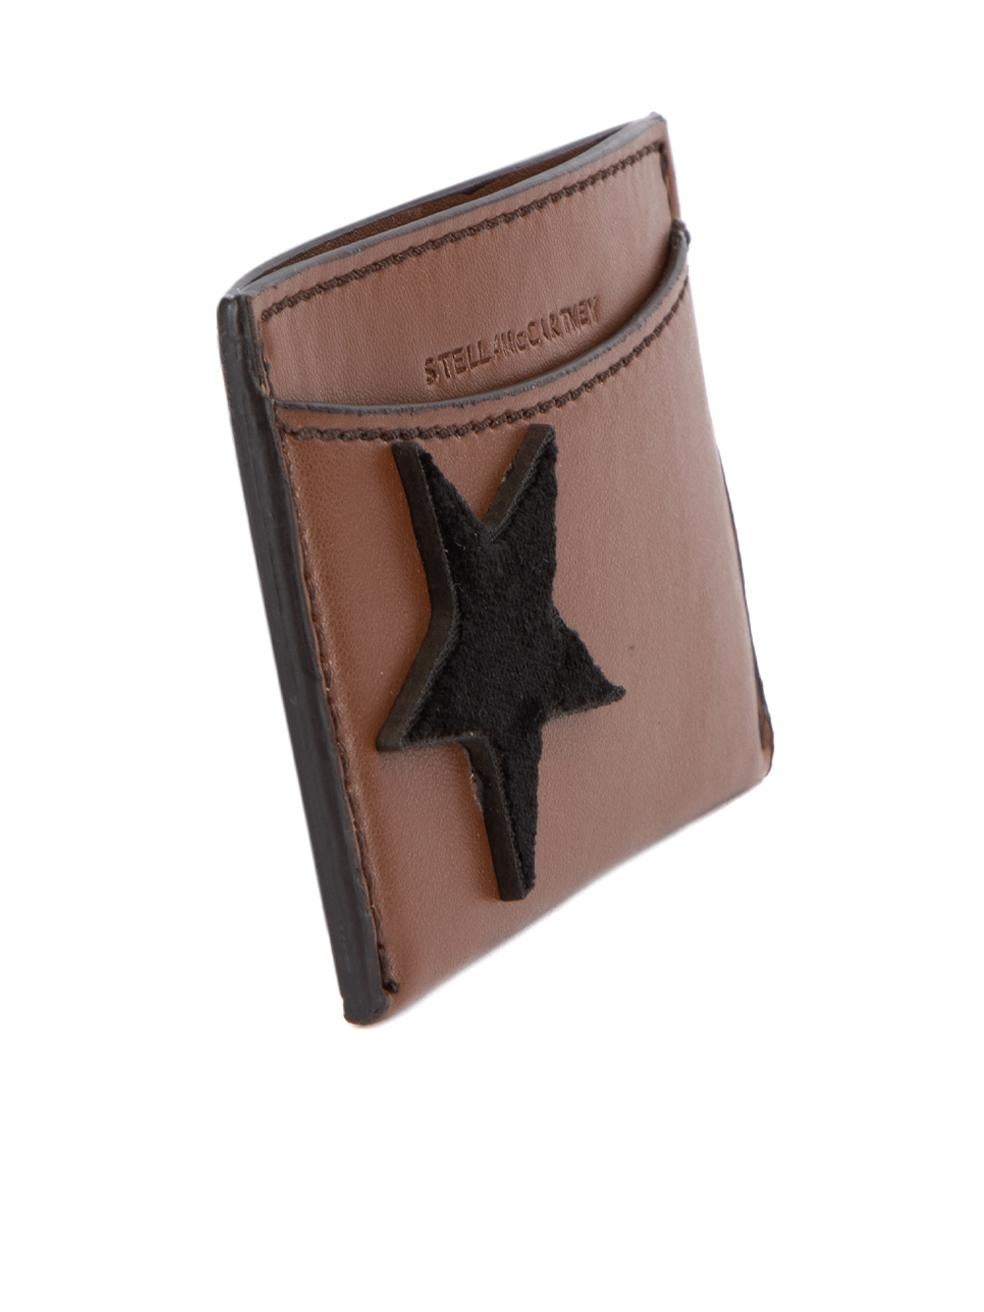 CONDITION is Very good. Hardly any visible wear to card holder is evident on this used Stella McCartney designer resale item. This item comes with original box. Details Brown Leather Cardholder Black velvet star design Stella McCartney logo 3x Card